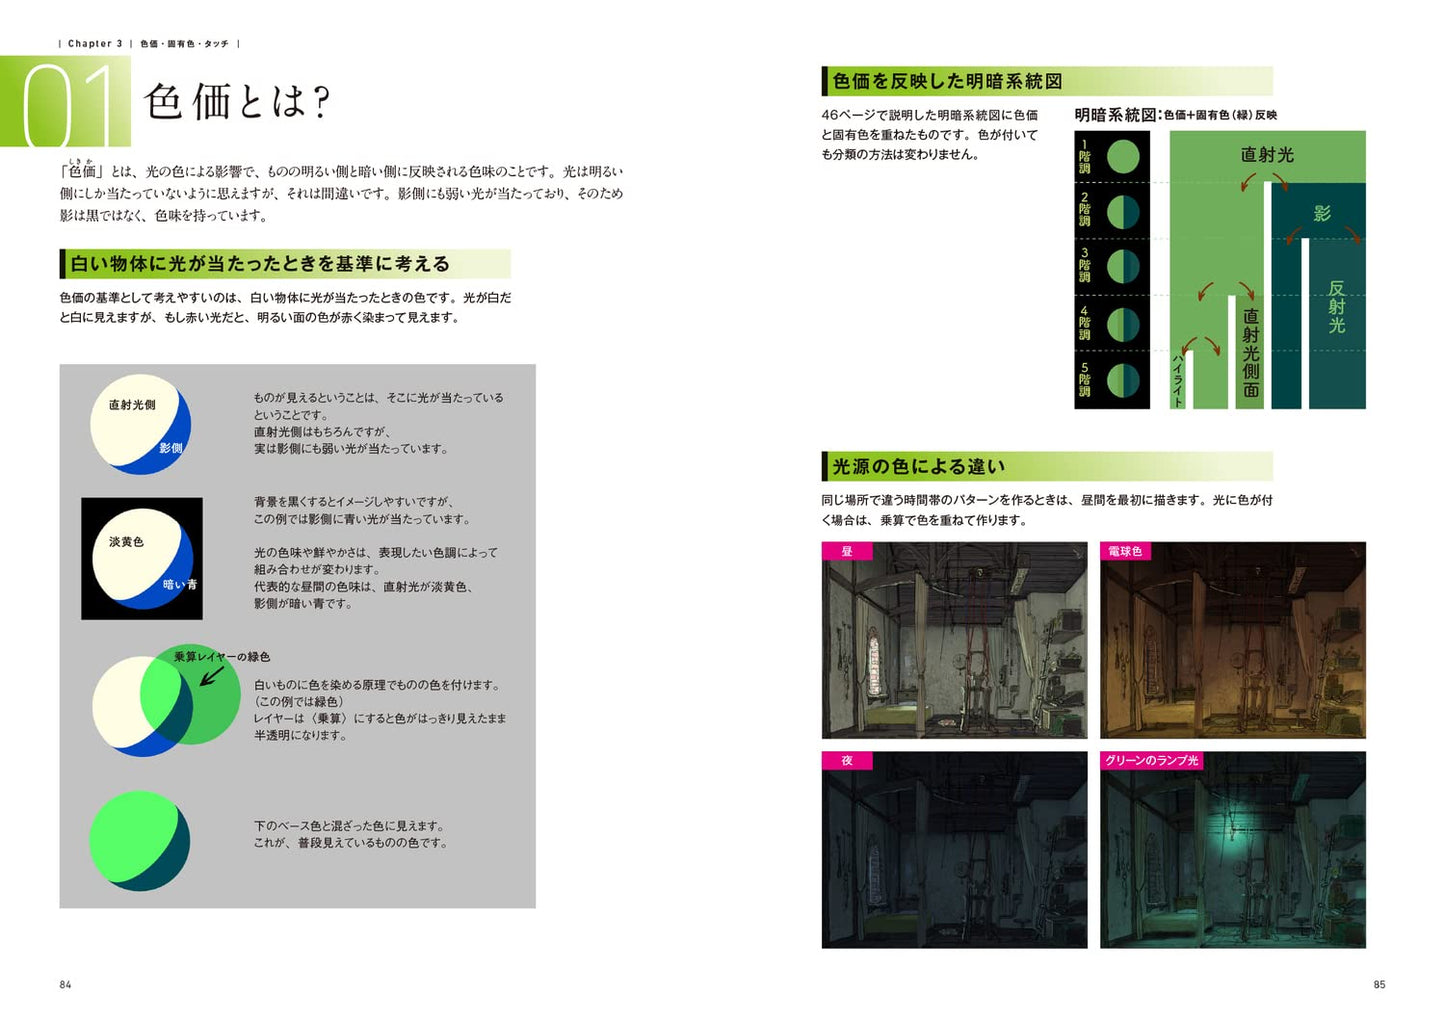 Basic rules of background painting taught at anime studio